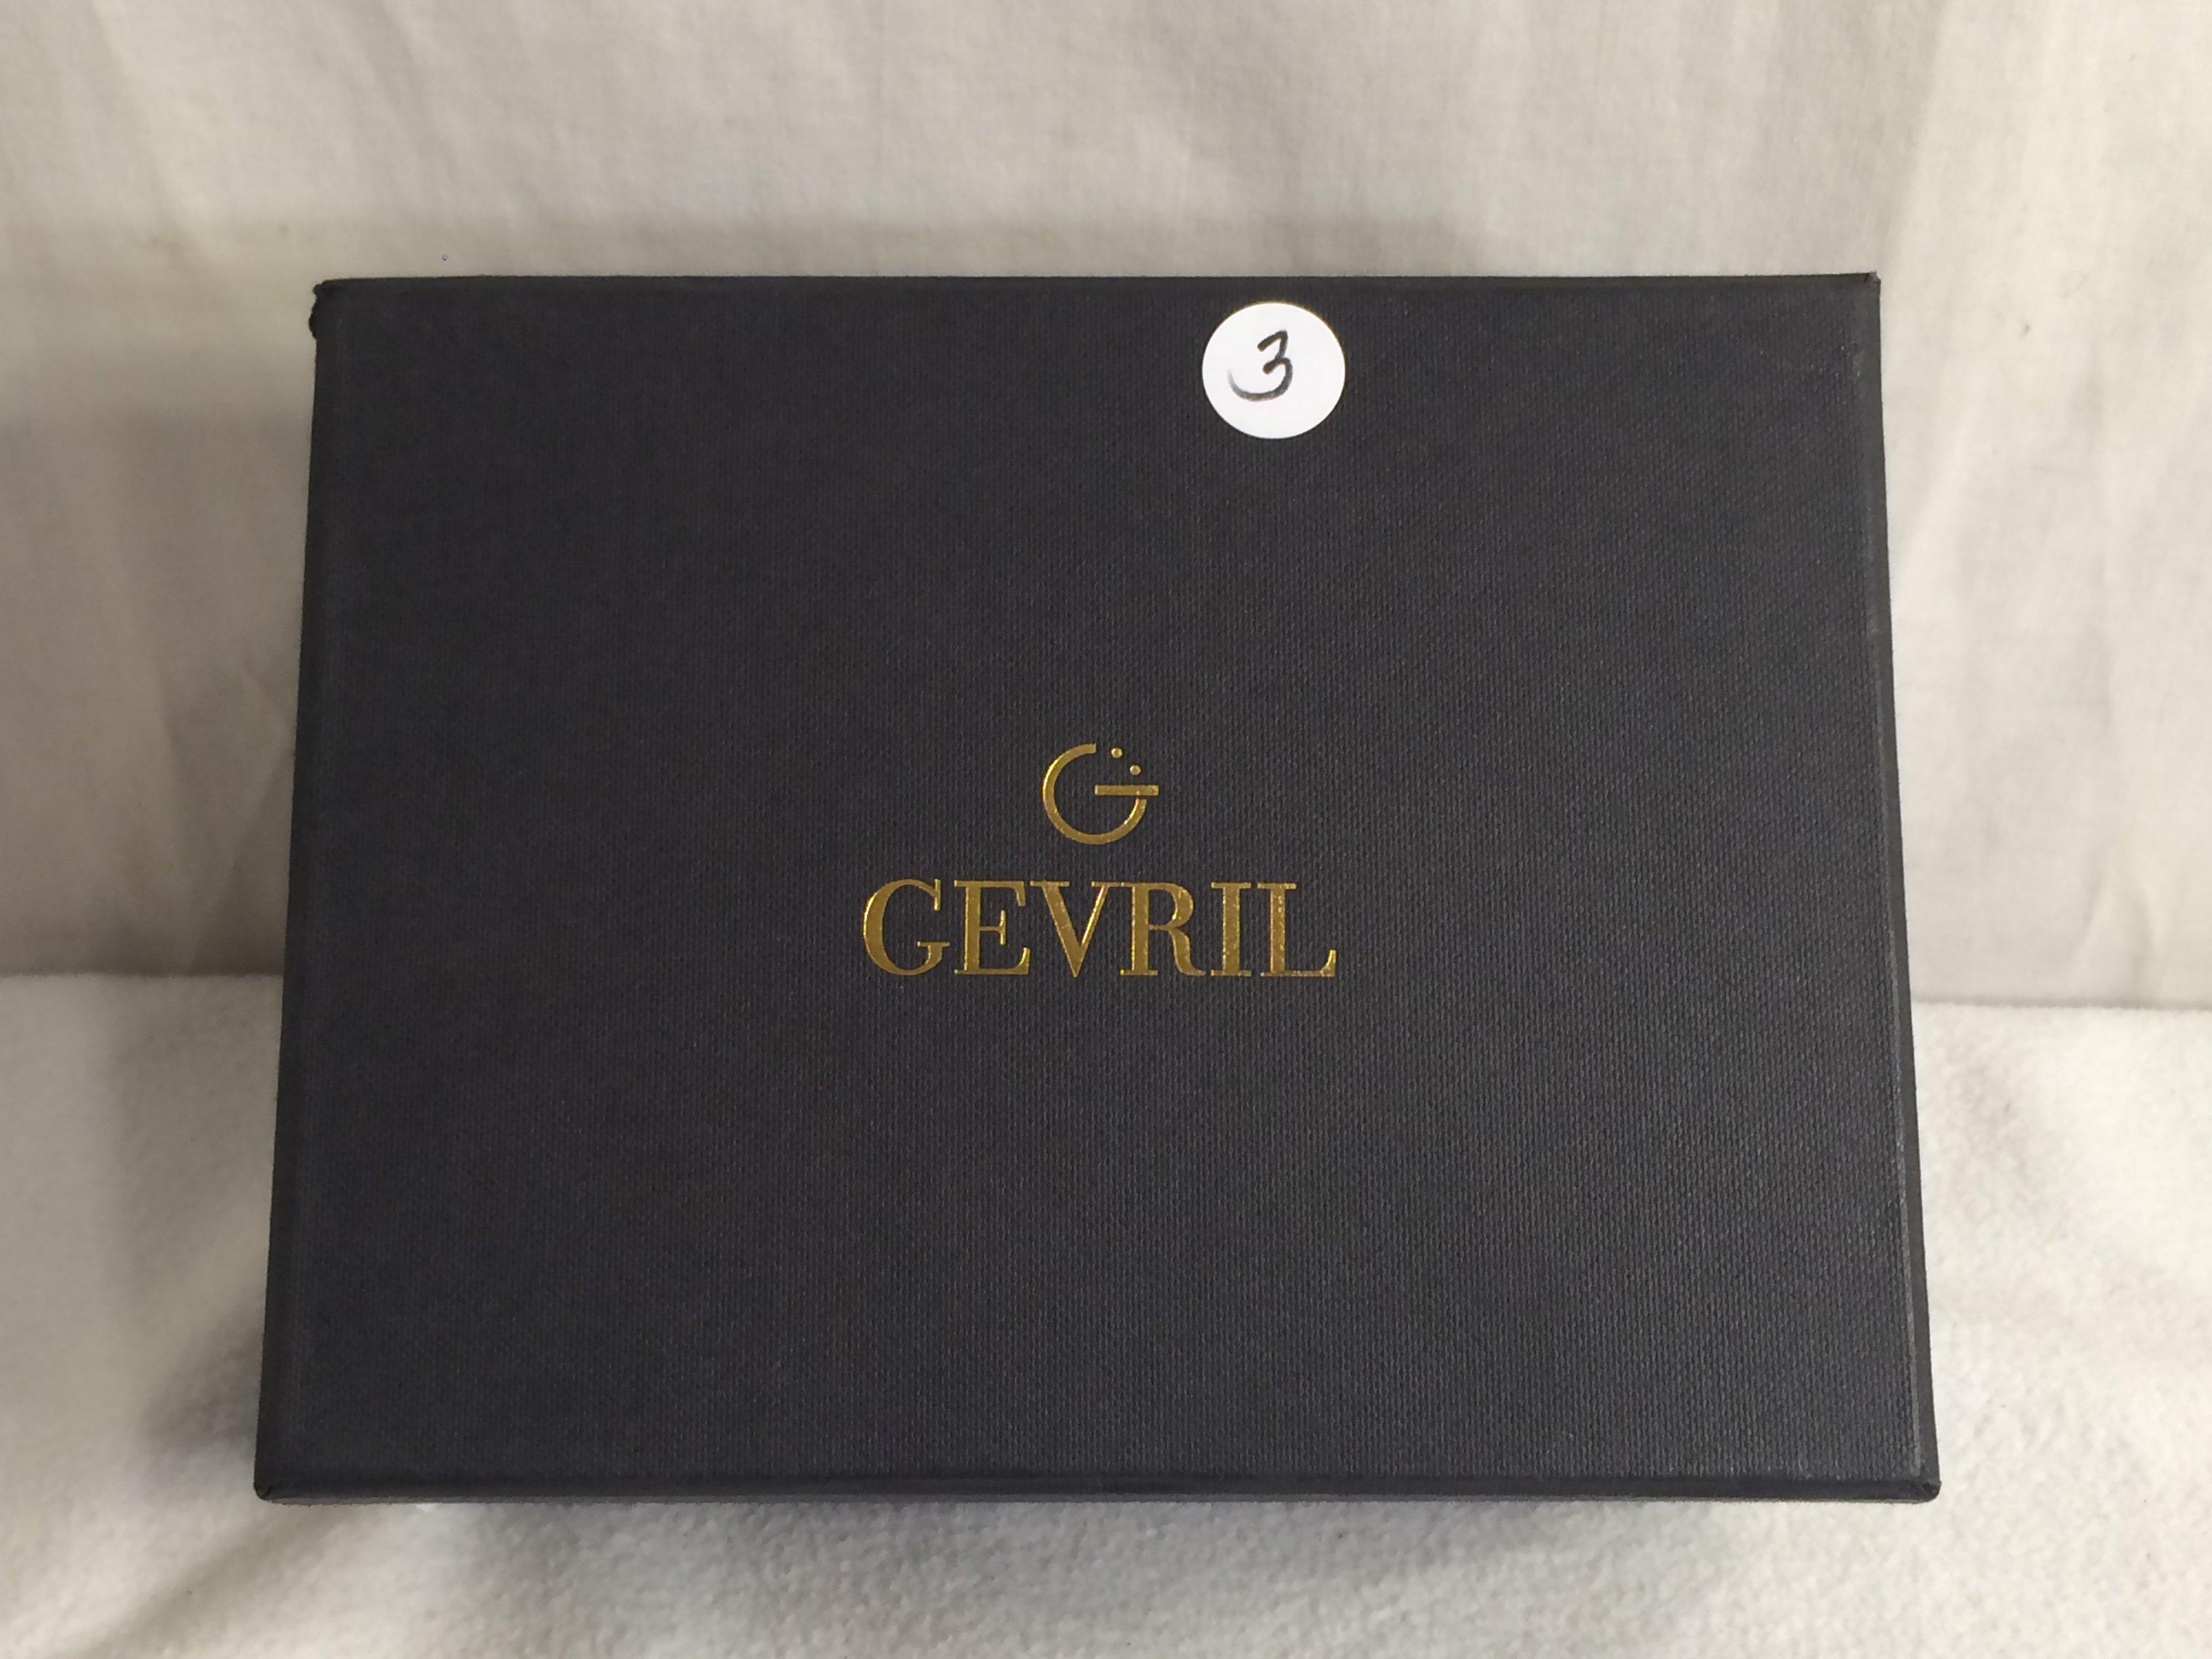 Collector New Gevril Ref No.N4131 184/500 18 Jewels Swiss made Black Leather Wristband